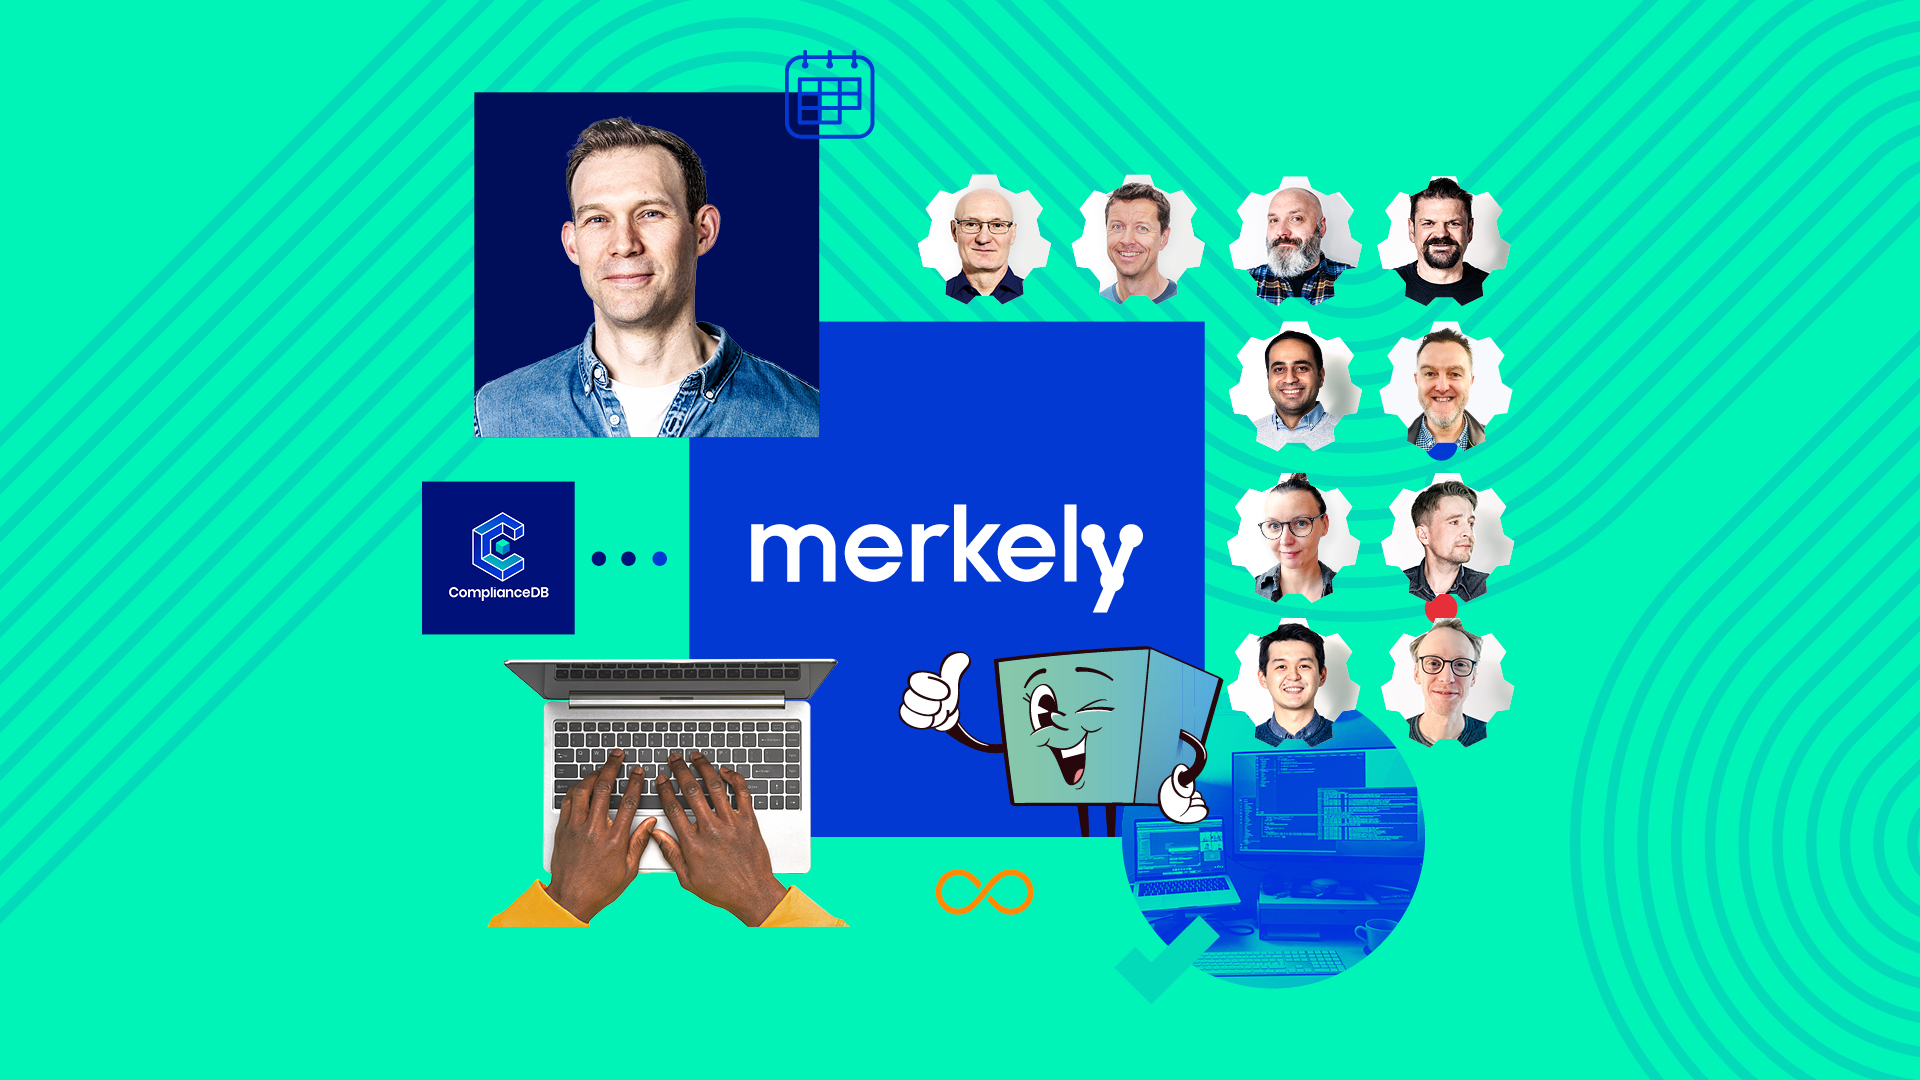 Merkely 2021 - Making friends with change